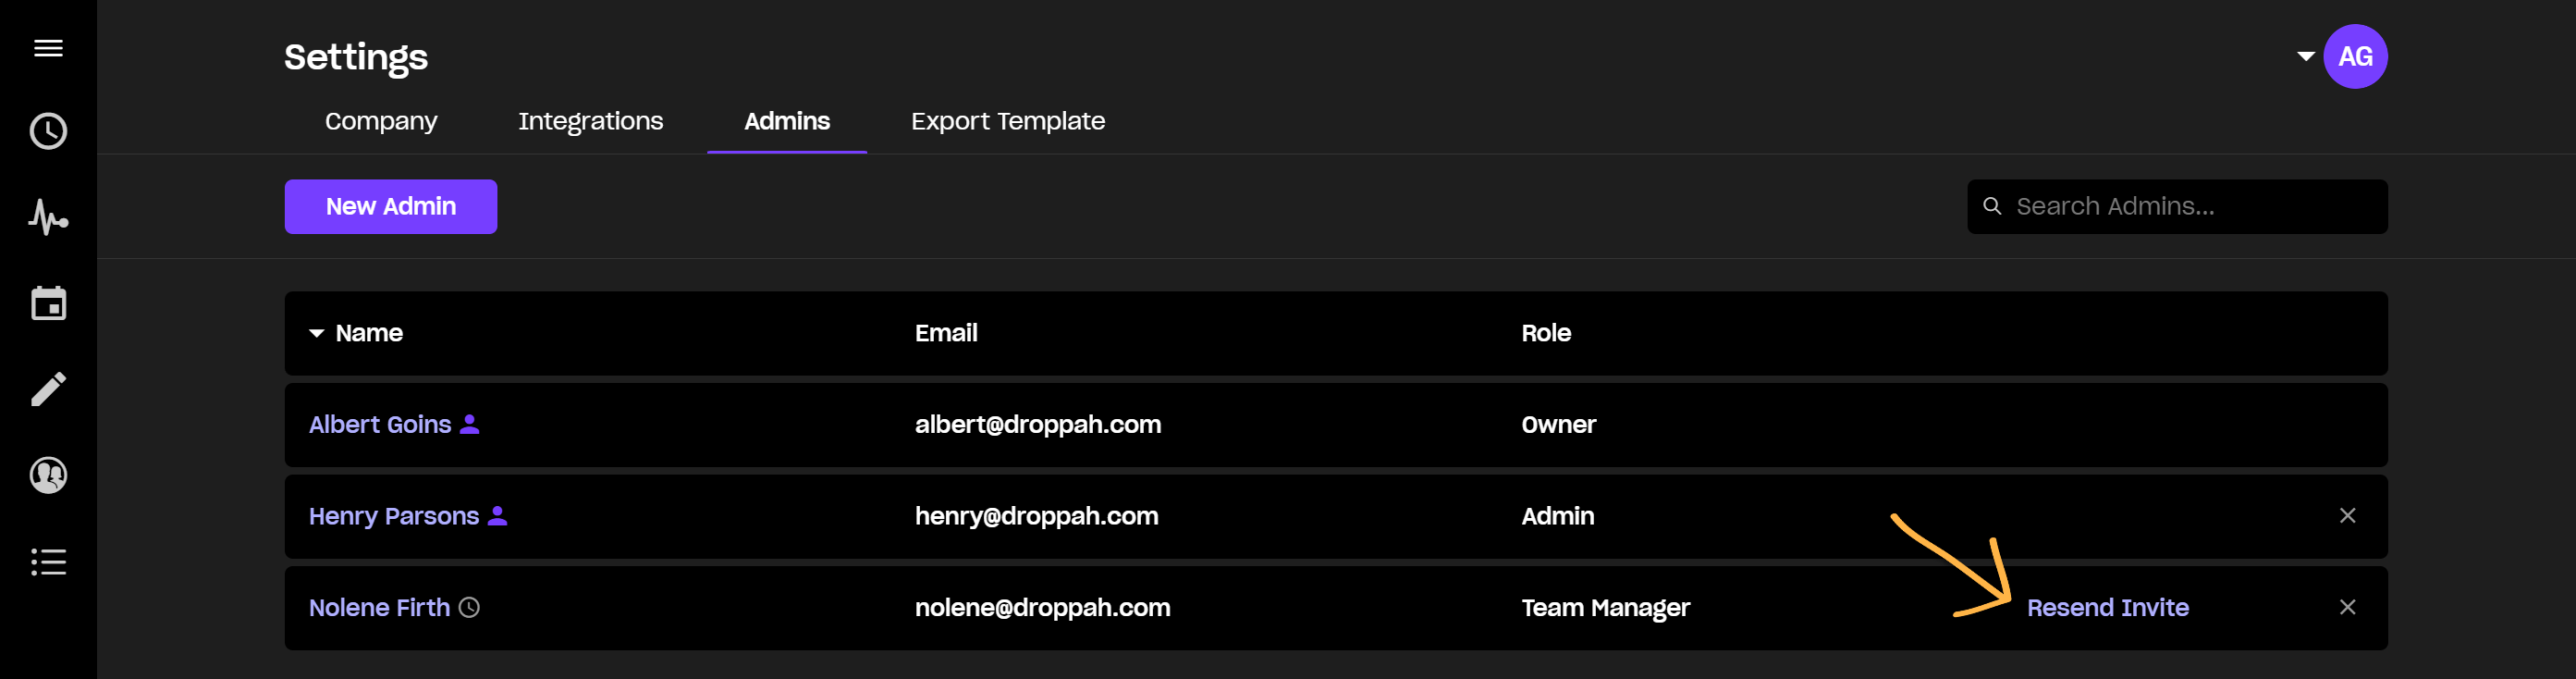 Adding_Team_Managers_-_Resend_Invite_to_Manager.png